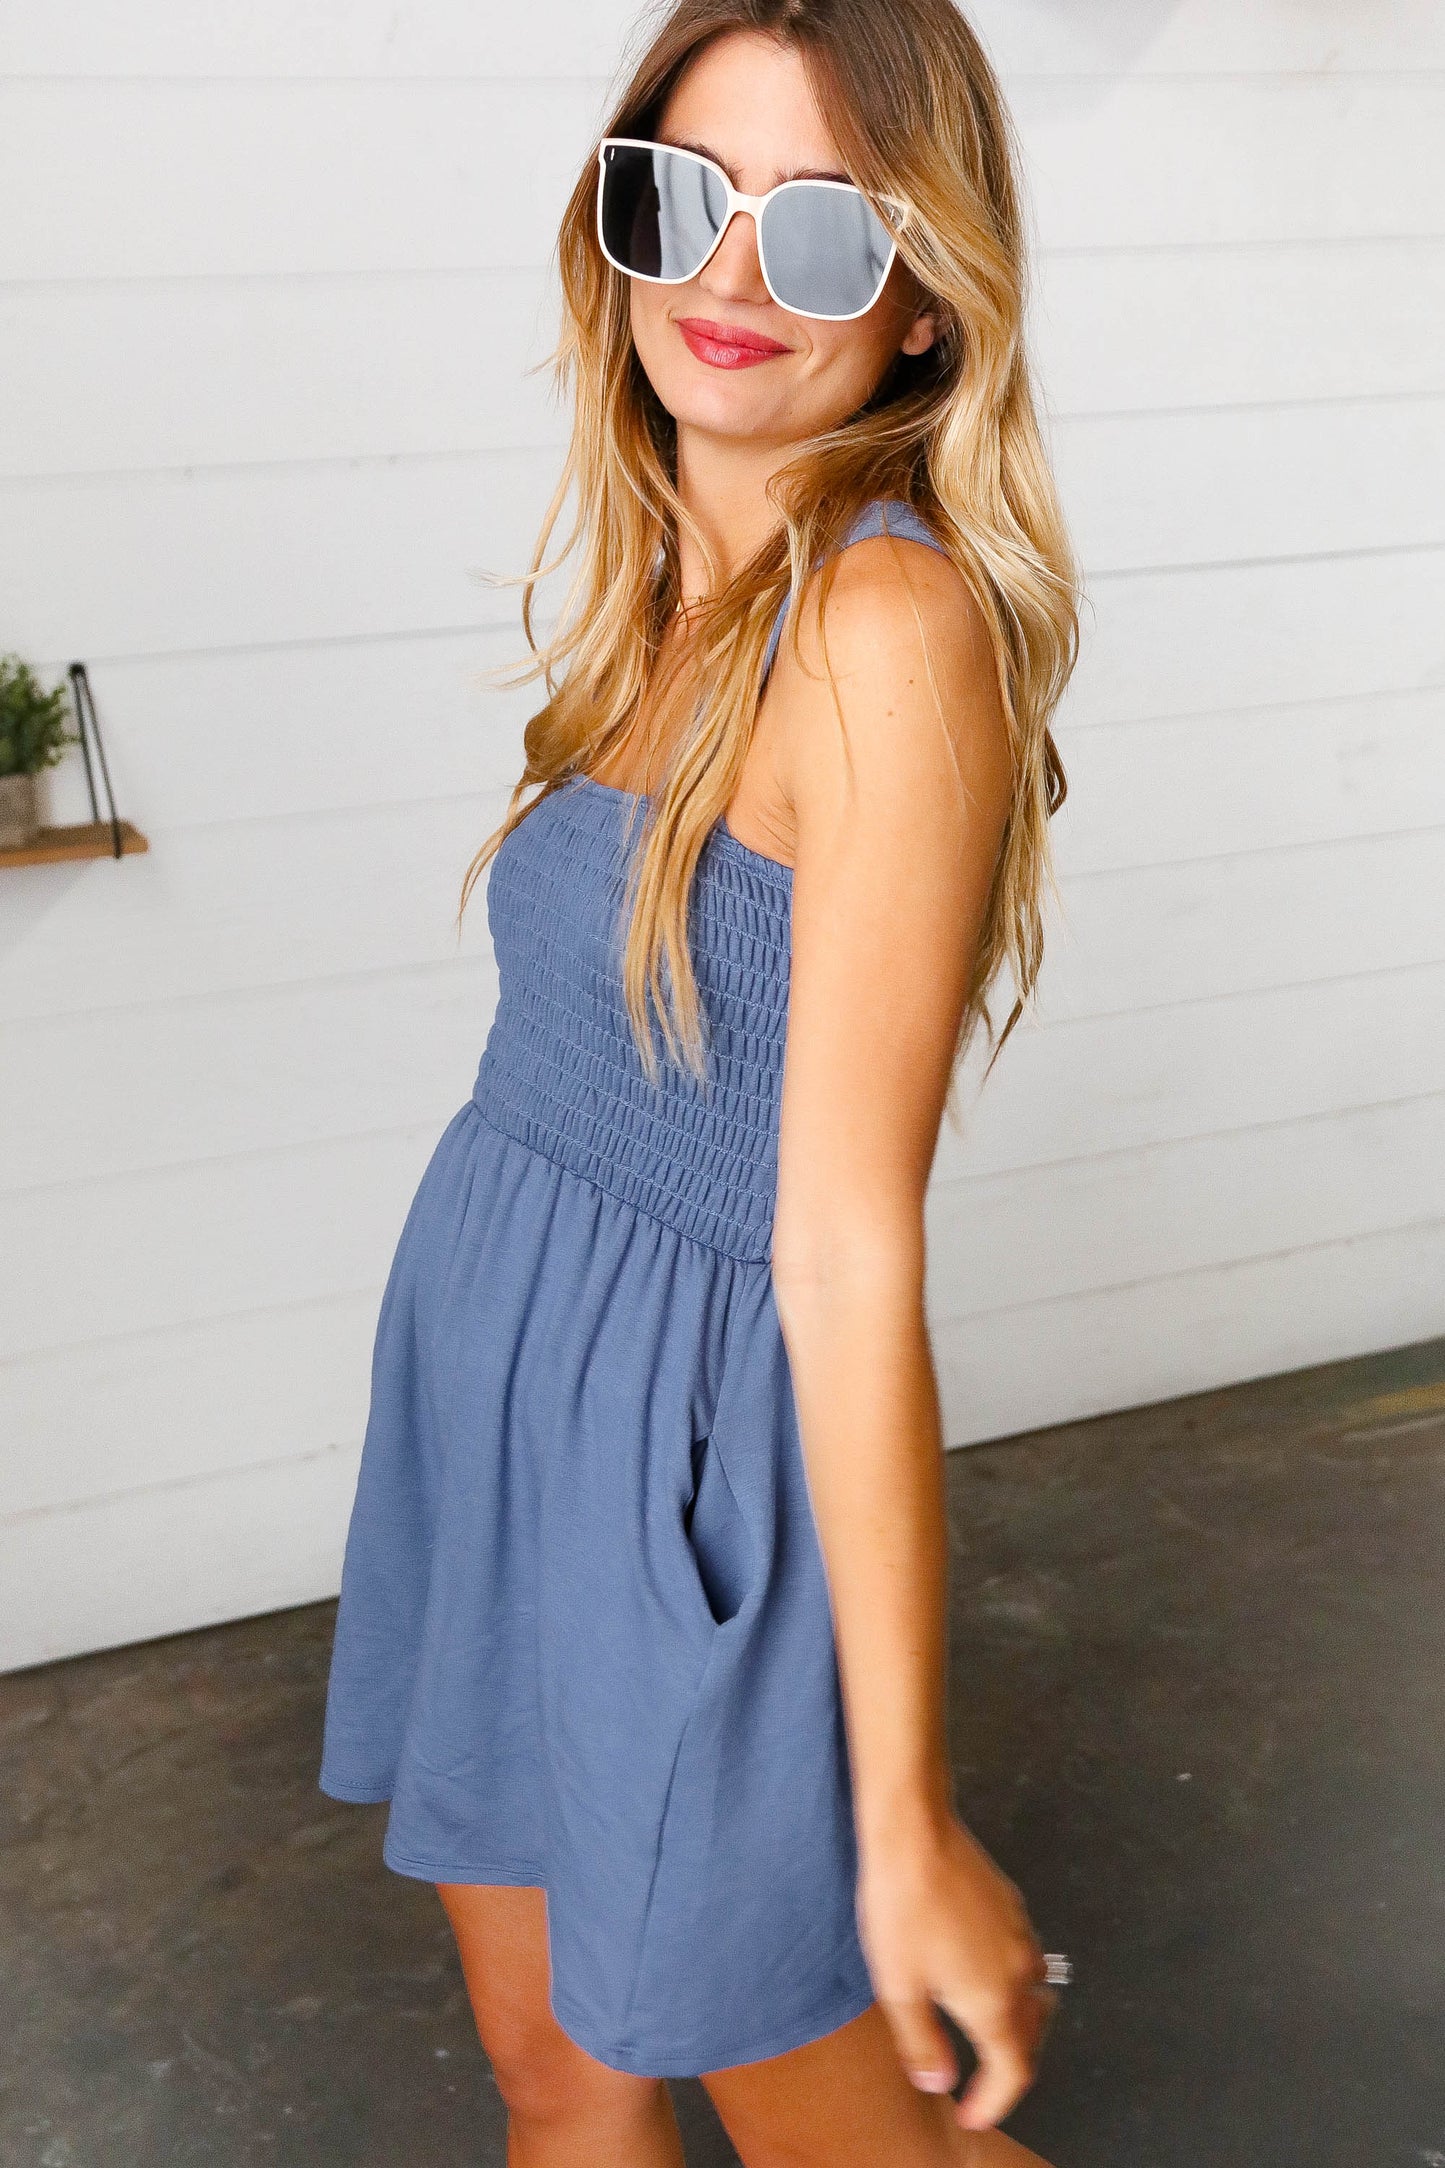 Dusty Blue Terry Smocked Tank Top Baggy Shorts Romper